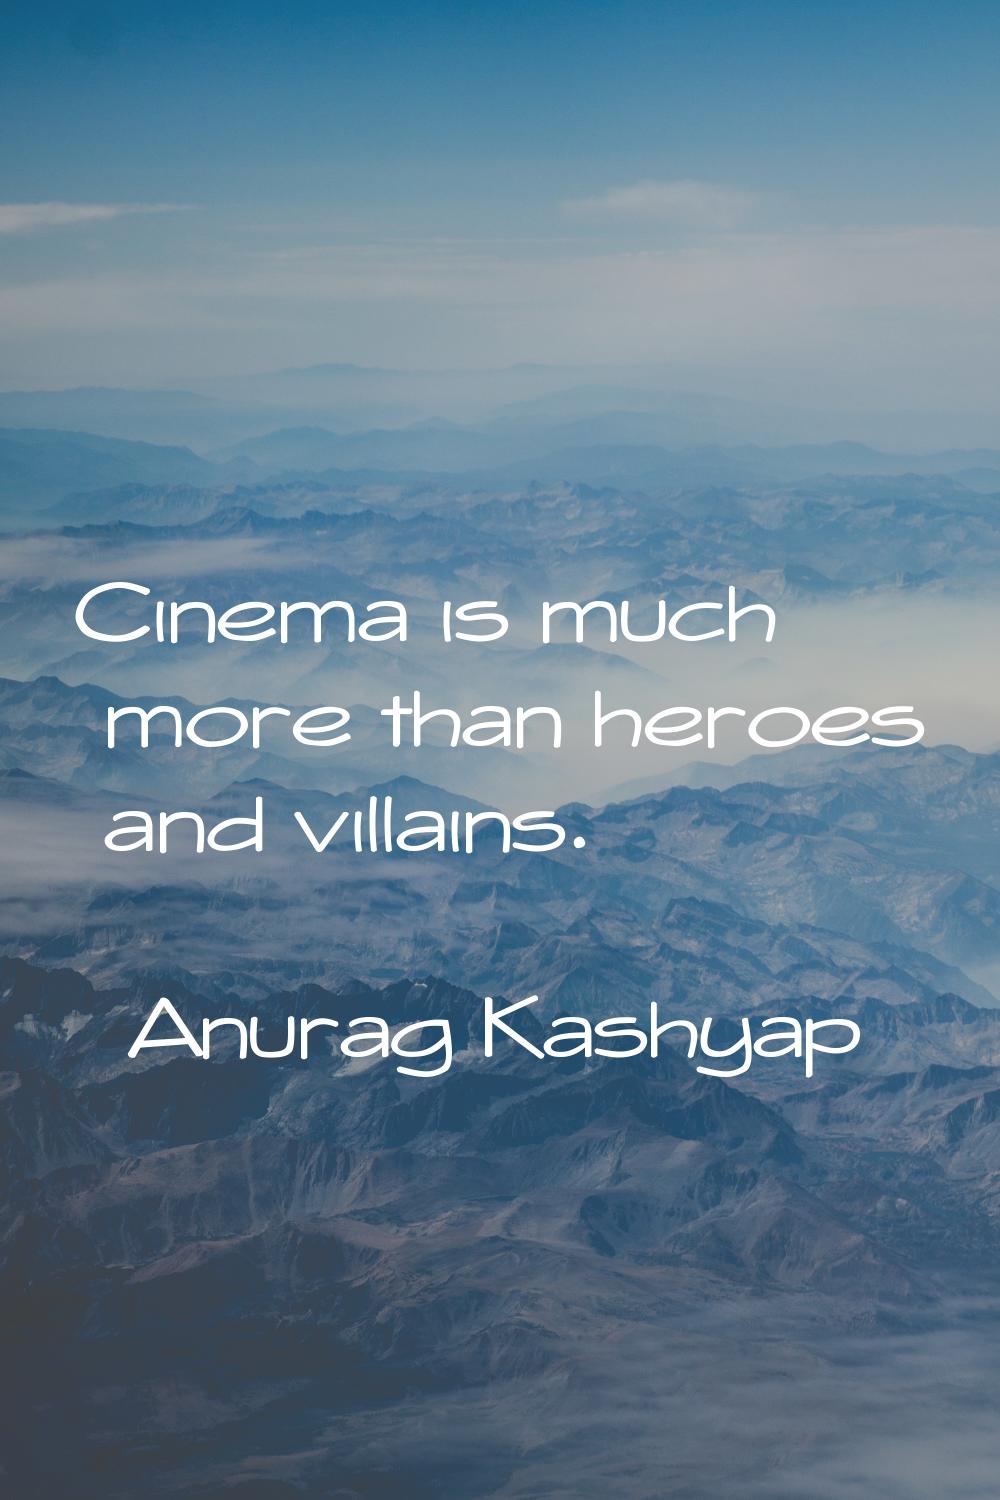 Cinema is much more than heroes and villains.